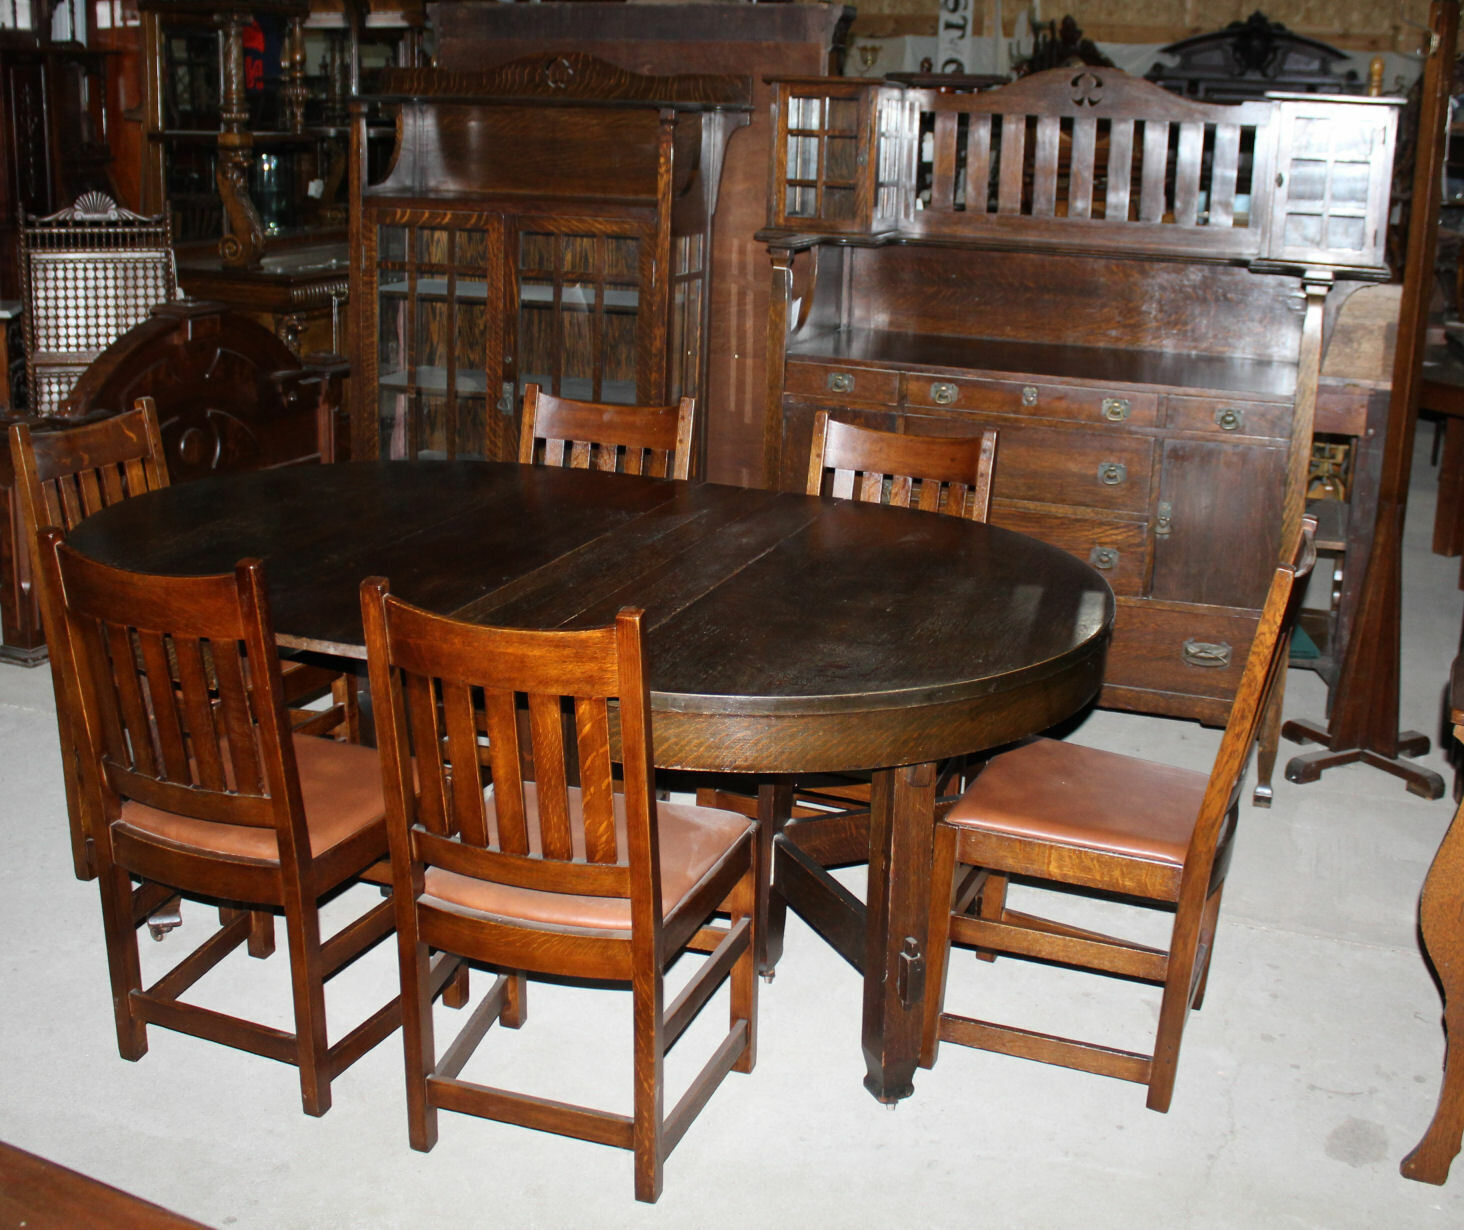 Antique Limbert Dining Room Set – Sideboard, China, Dining Table, 6 chairs